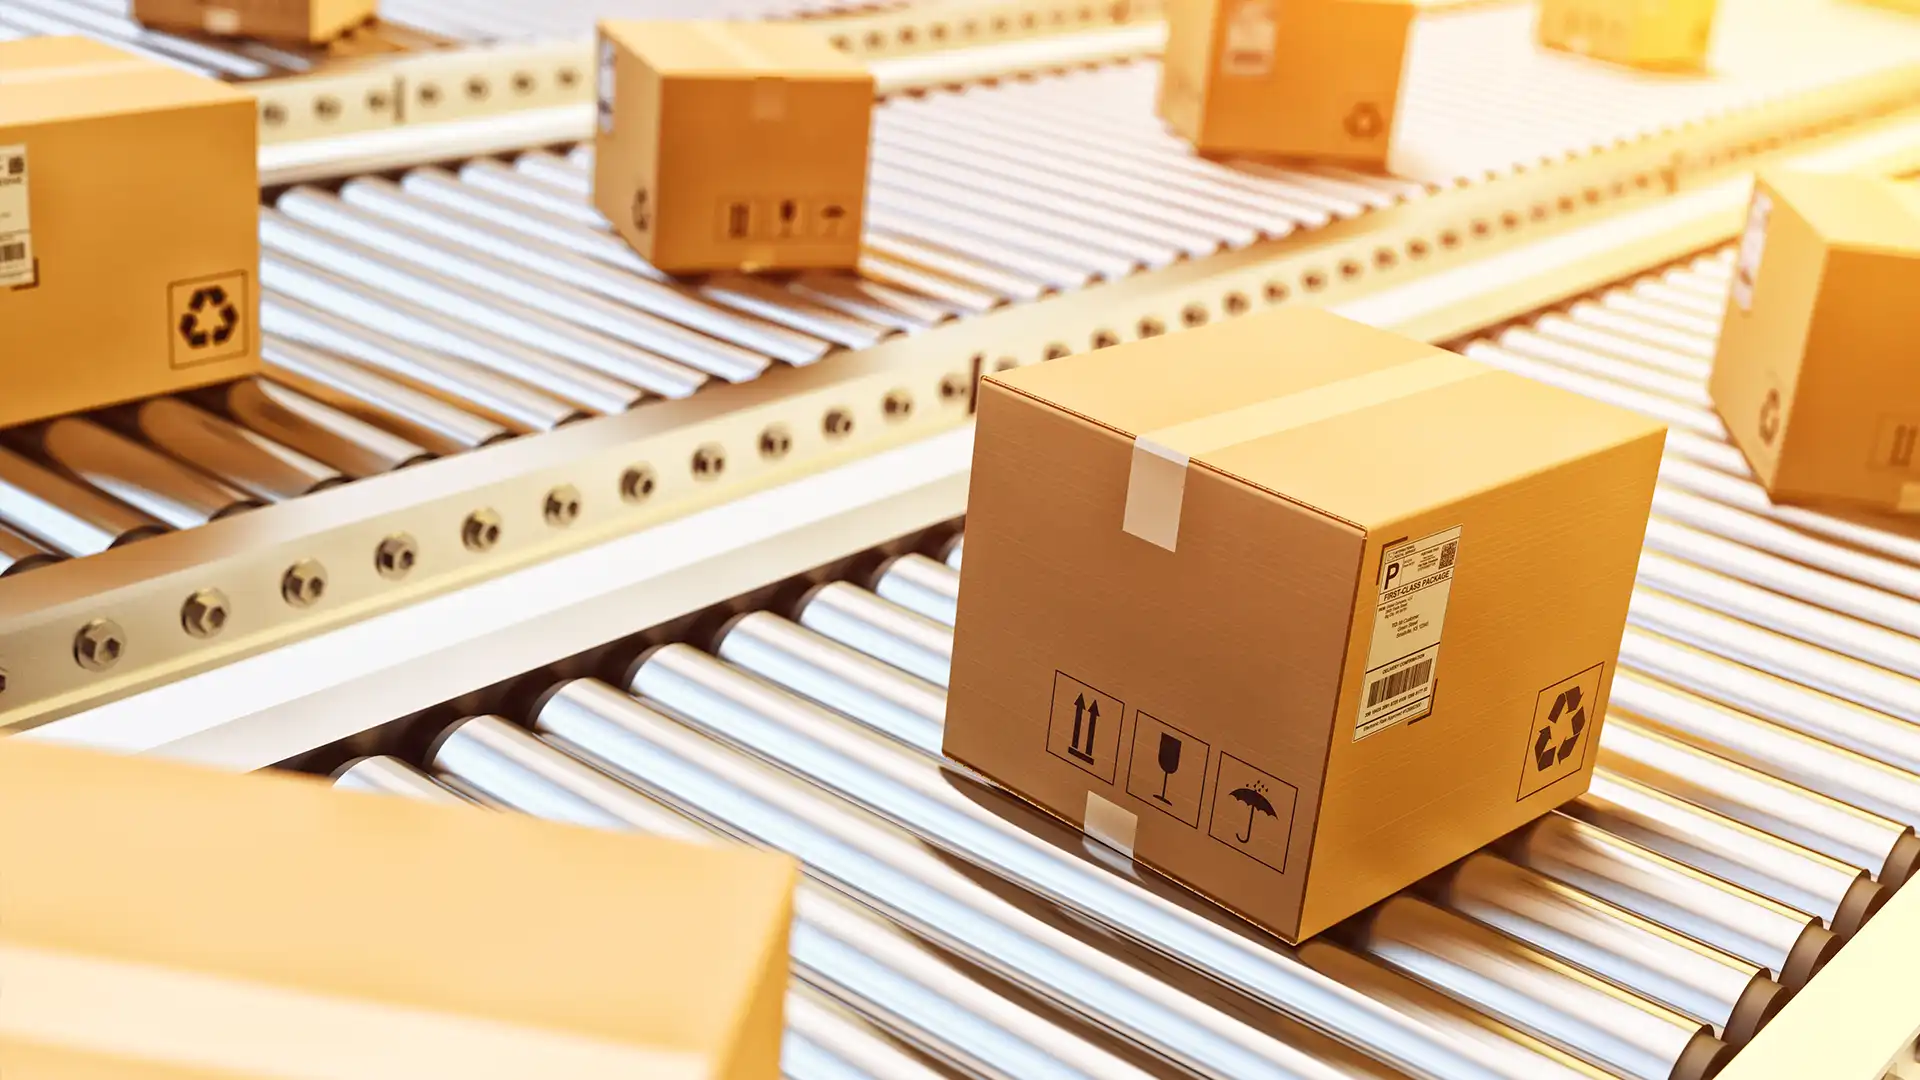 The Picking and Packing Operation: A Common Warehouse Bottleneck